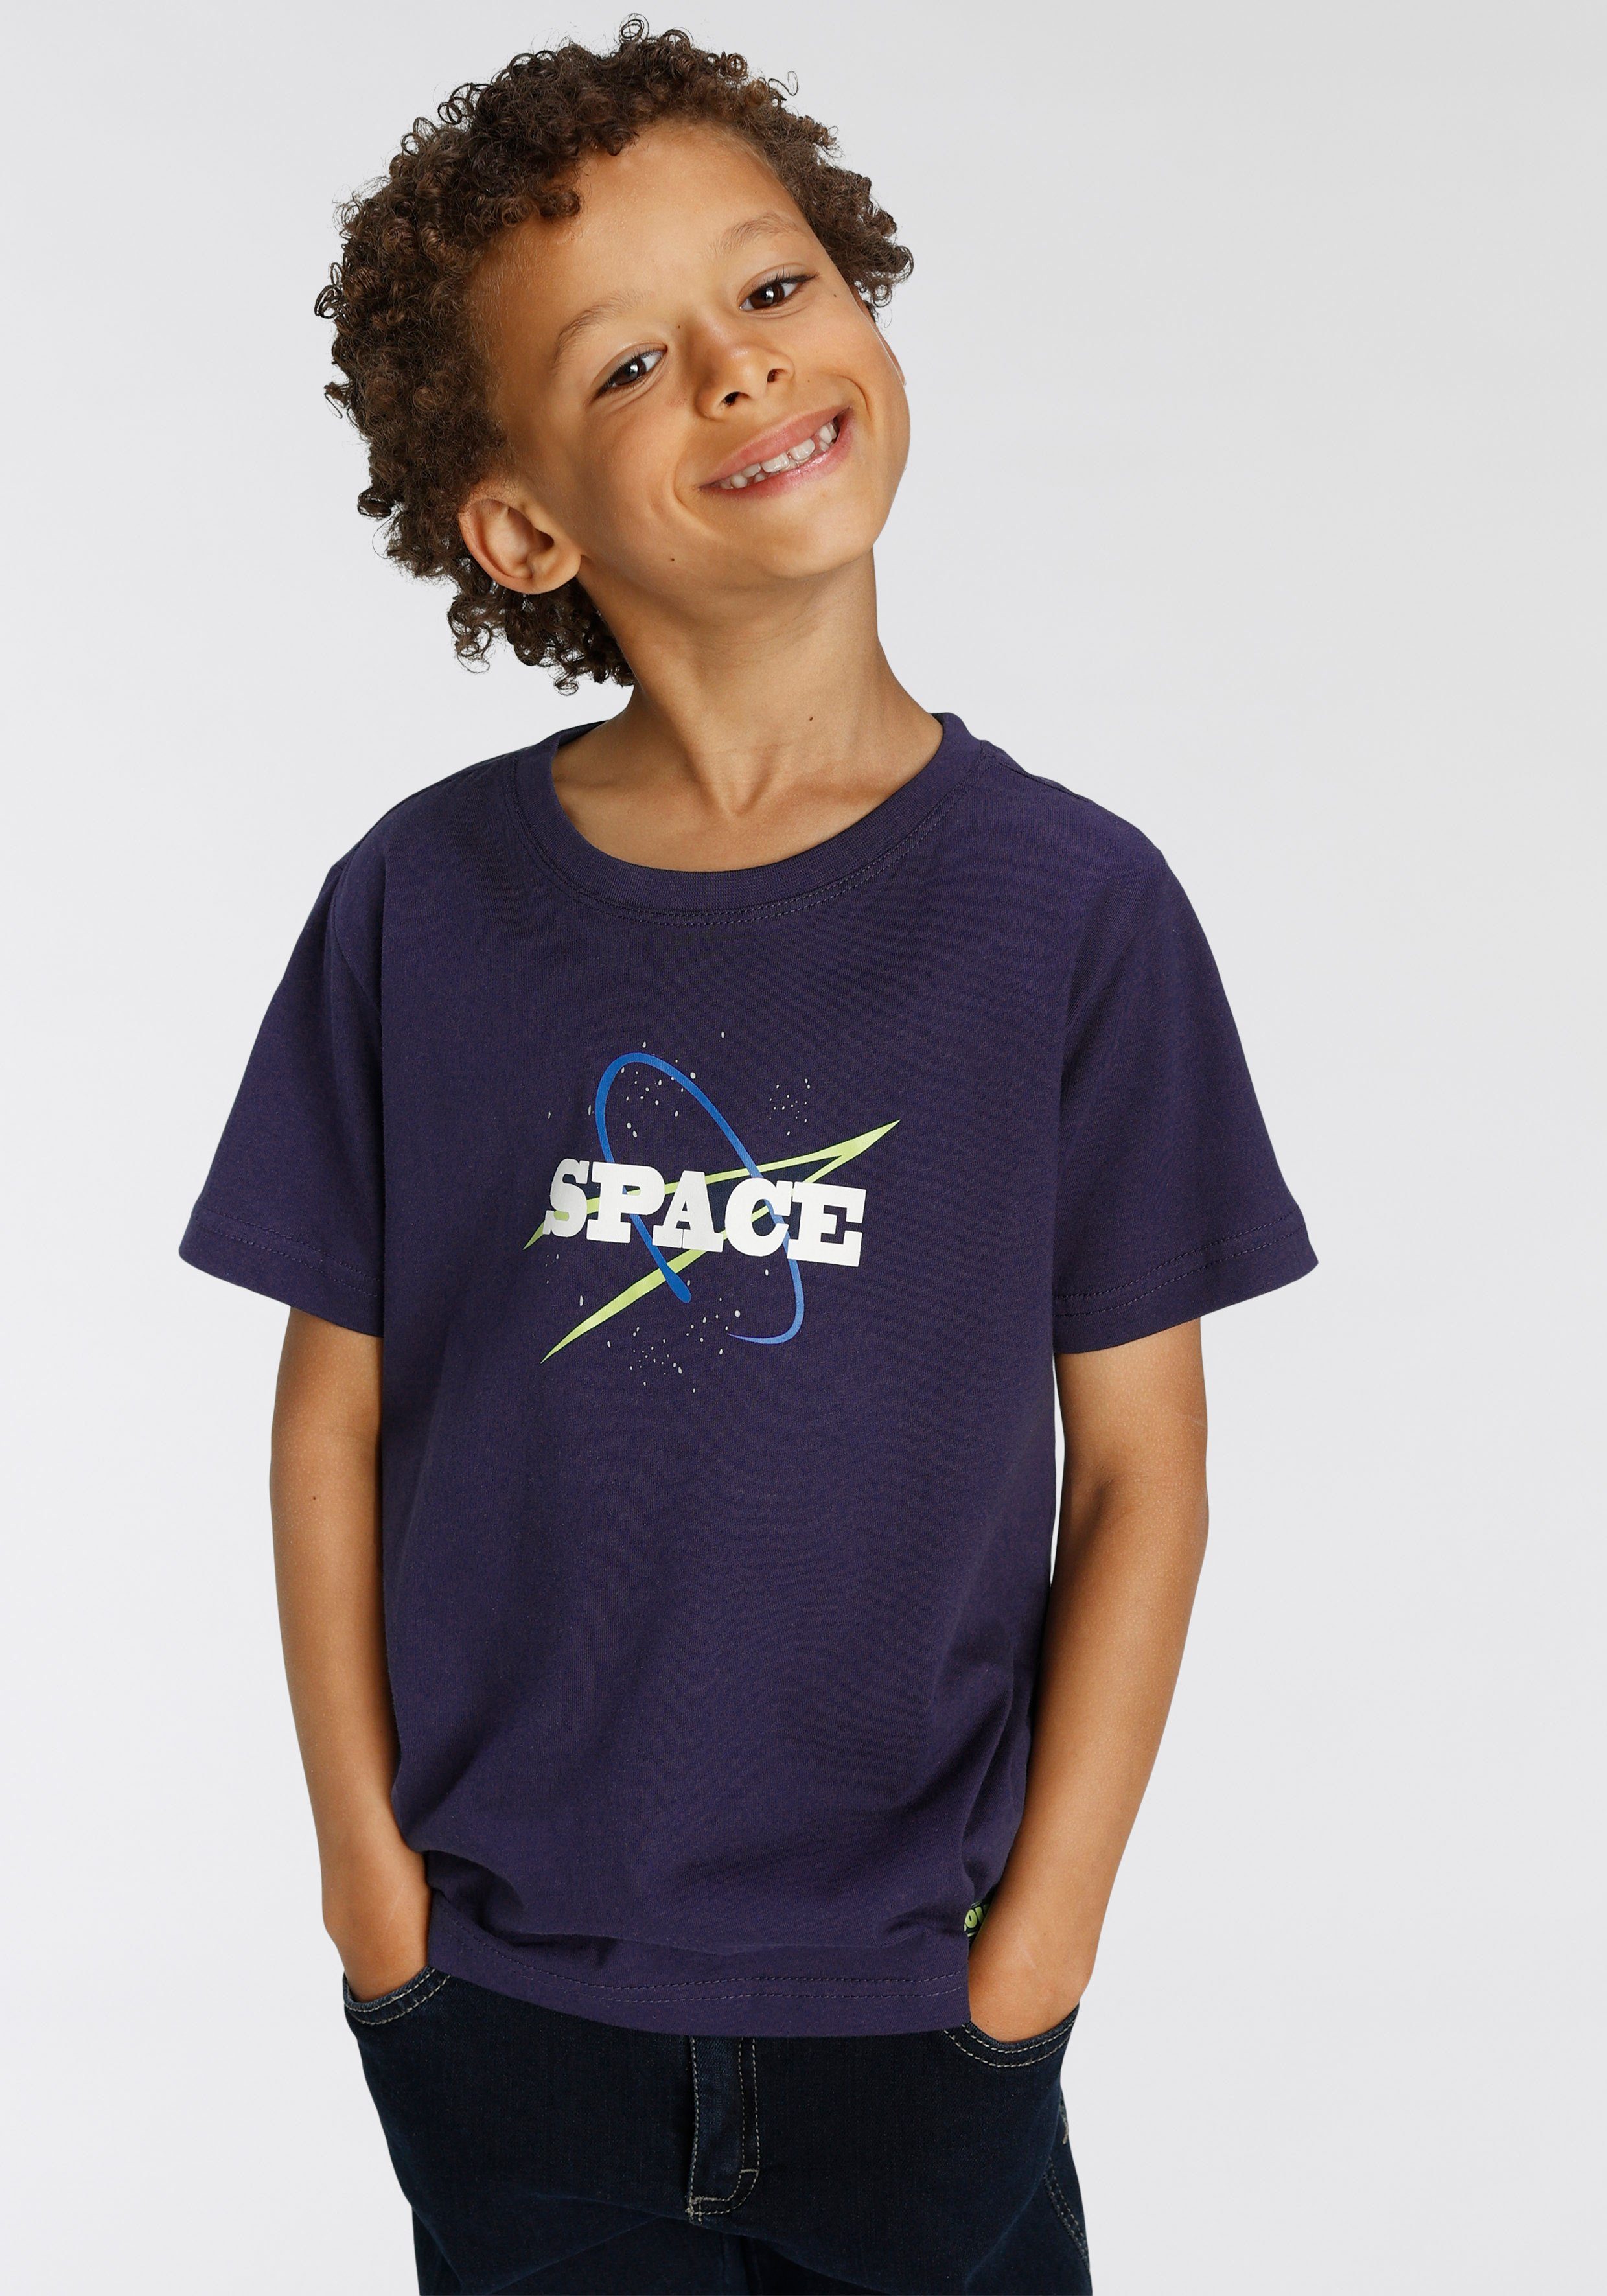 SPACE Bio-Baumwolle 2er-Pack) aus (Packung, Scout T-Shirt